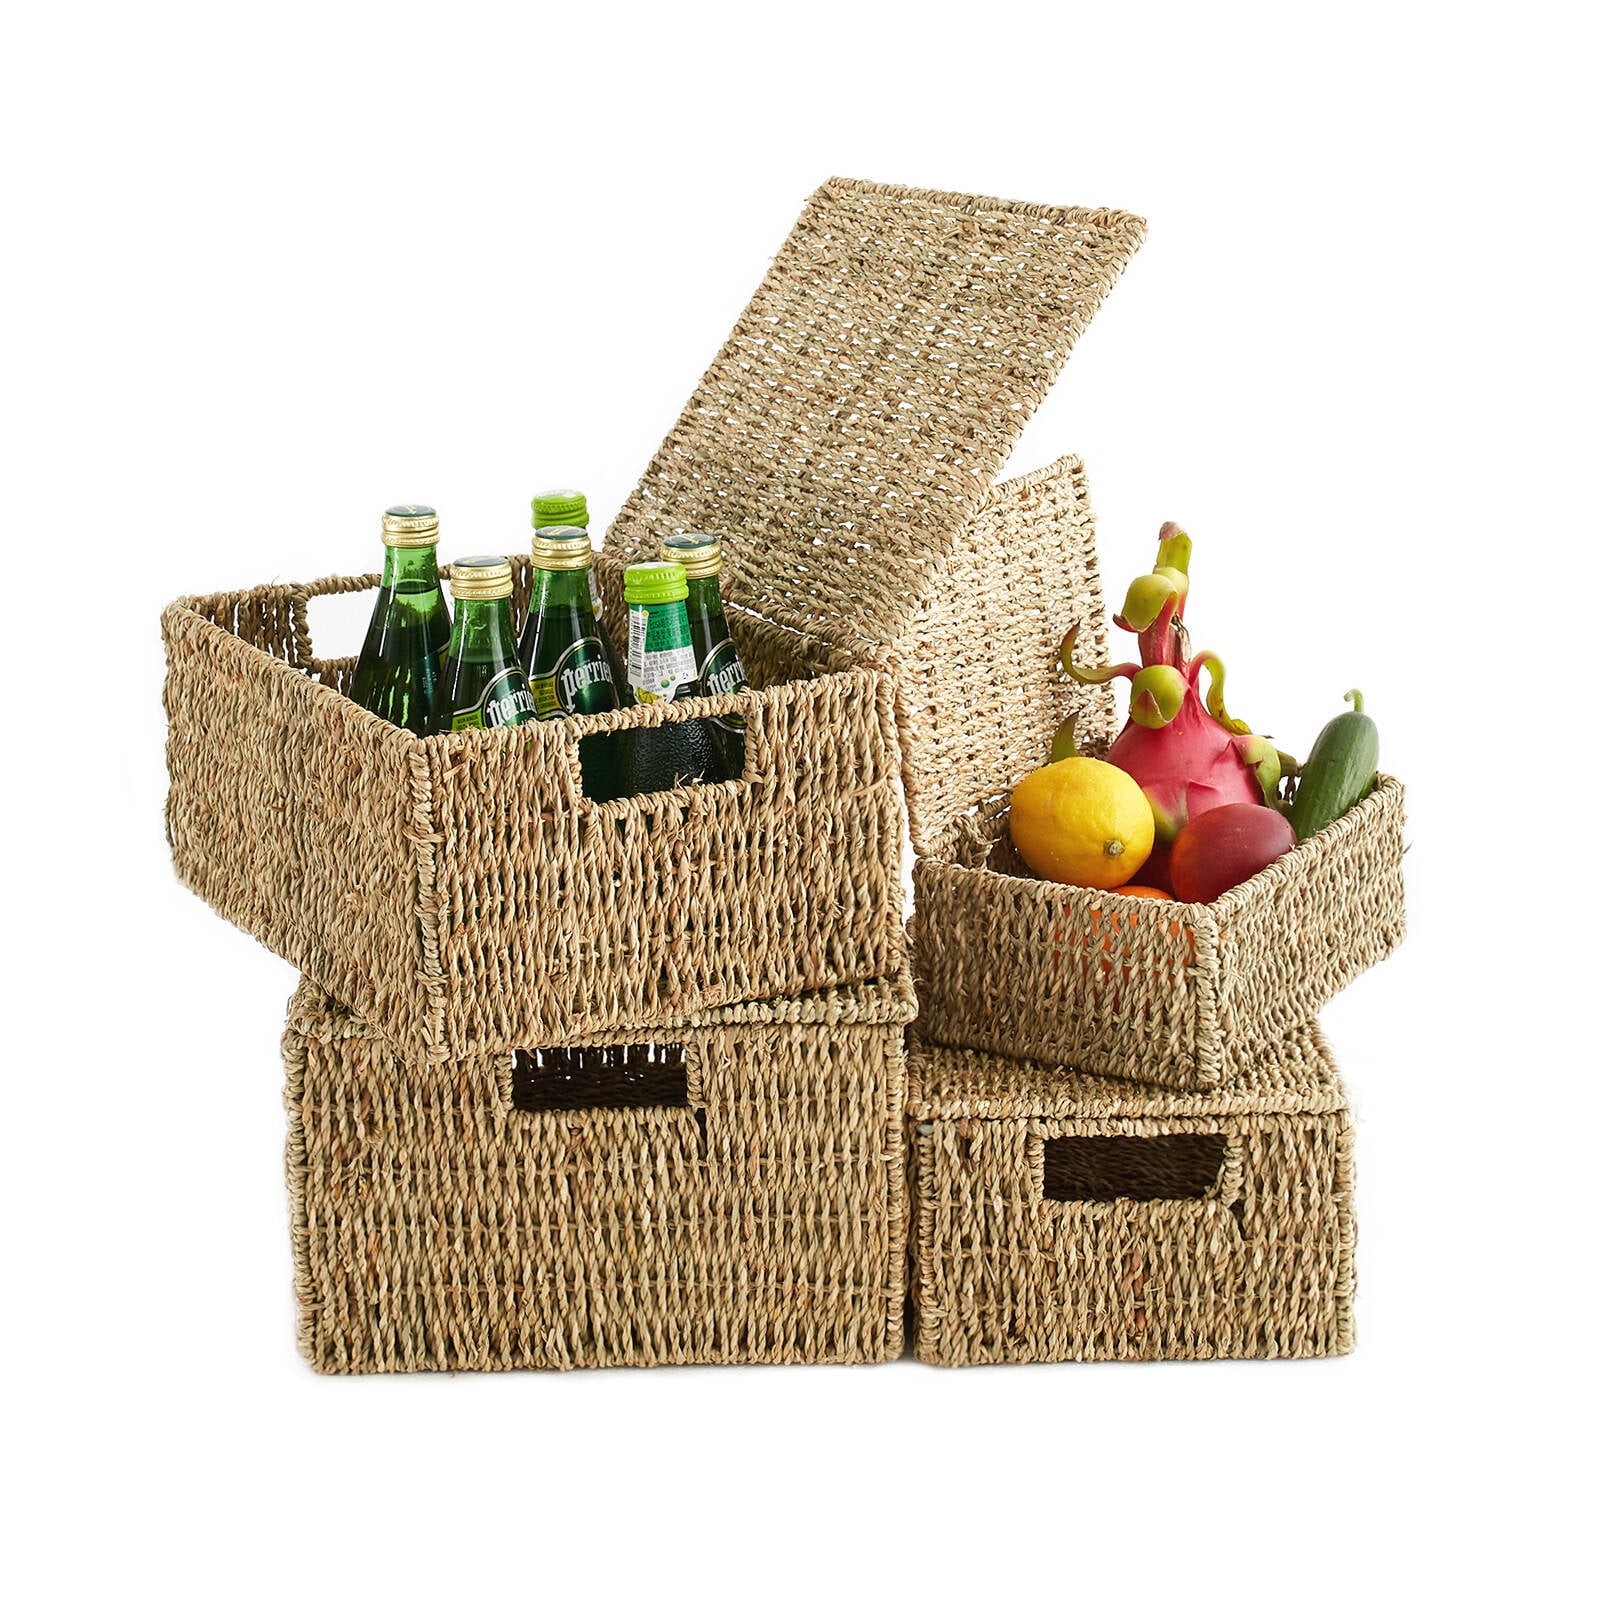 Seagrass Storage Baskets, 12X12X10in Cube Wicker Storage Basket for  Shelves, Pantry Baskets Organization and Storage, Kitchen Storage Baskets